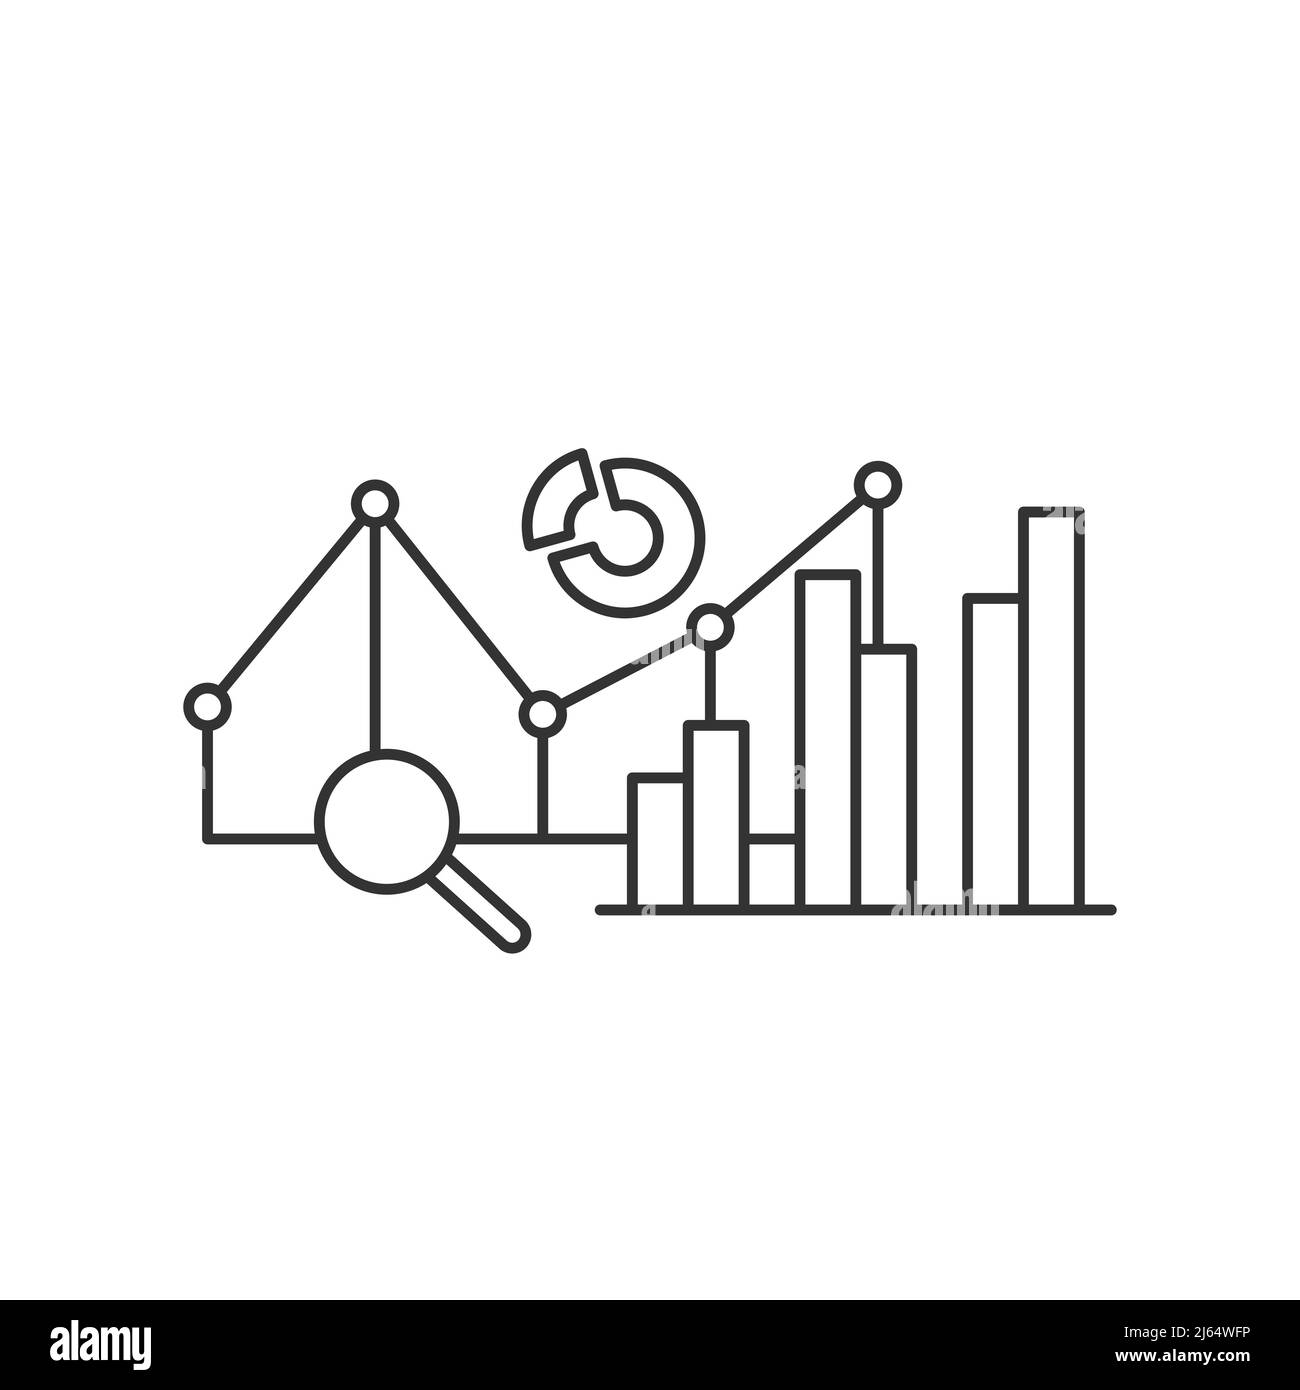 Analysis result performance icon Stock Vector